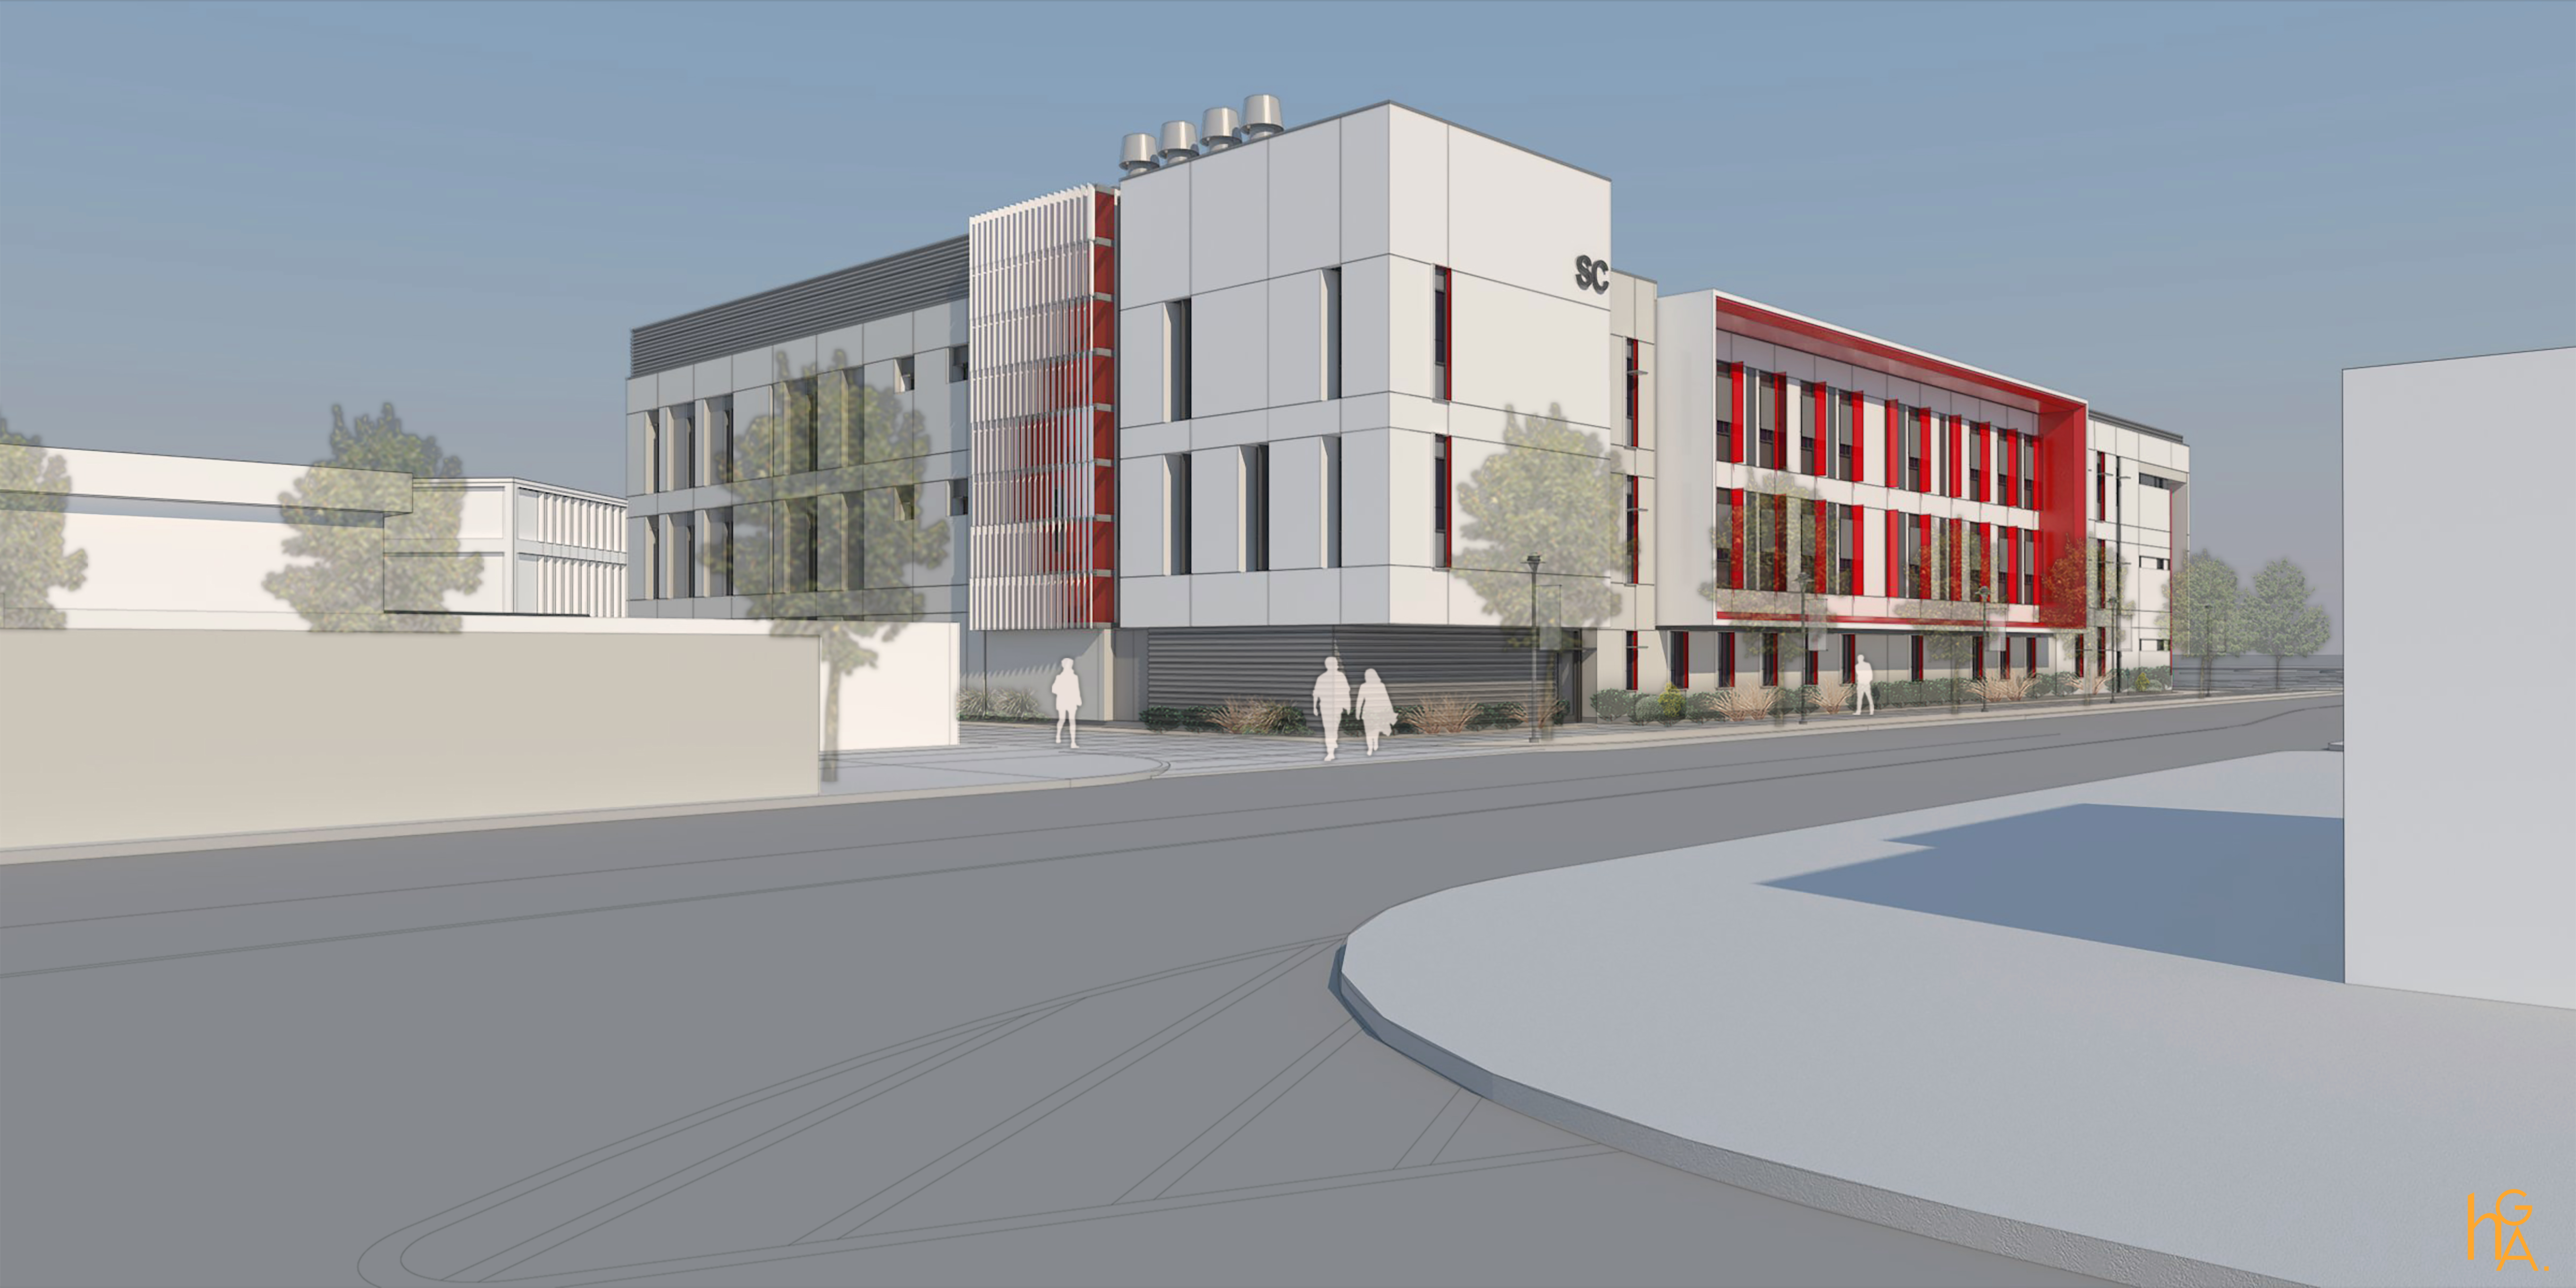 Back exterior rendering of the planned Science Center building